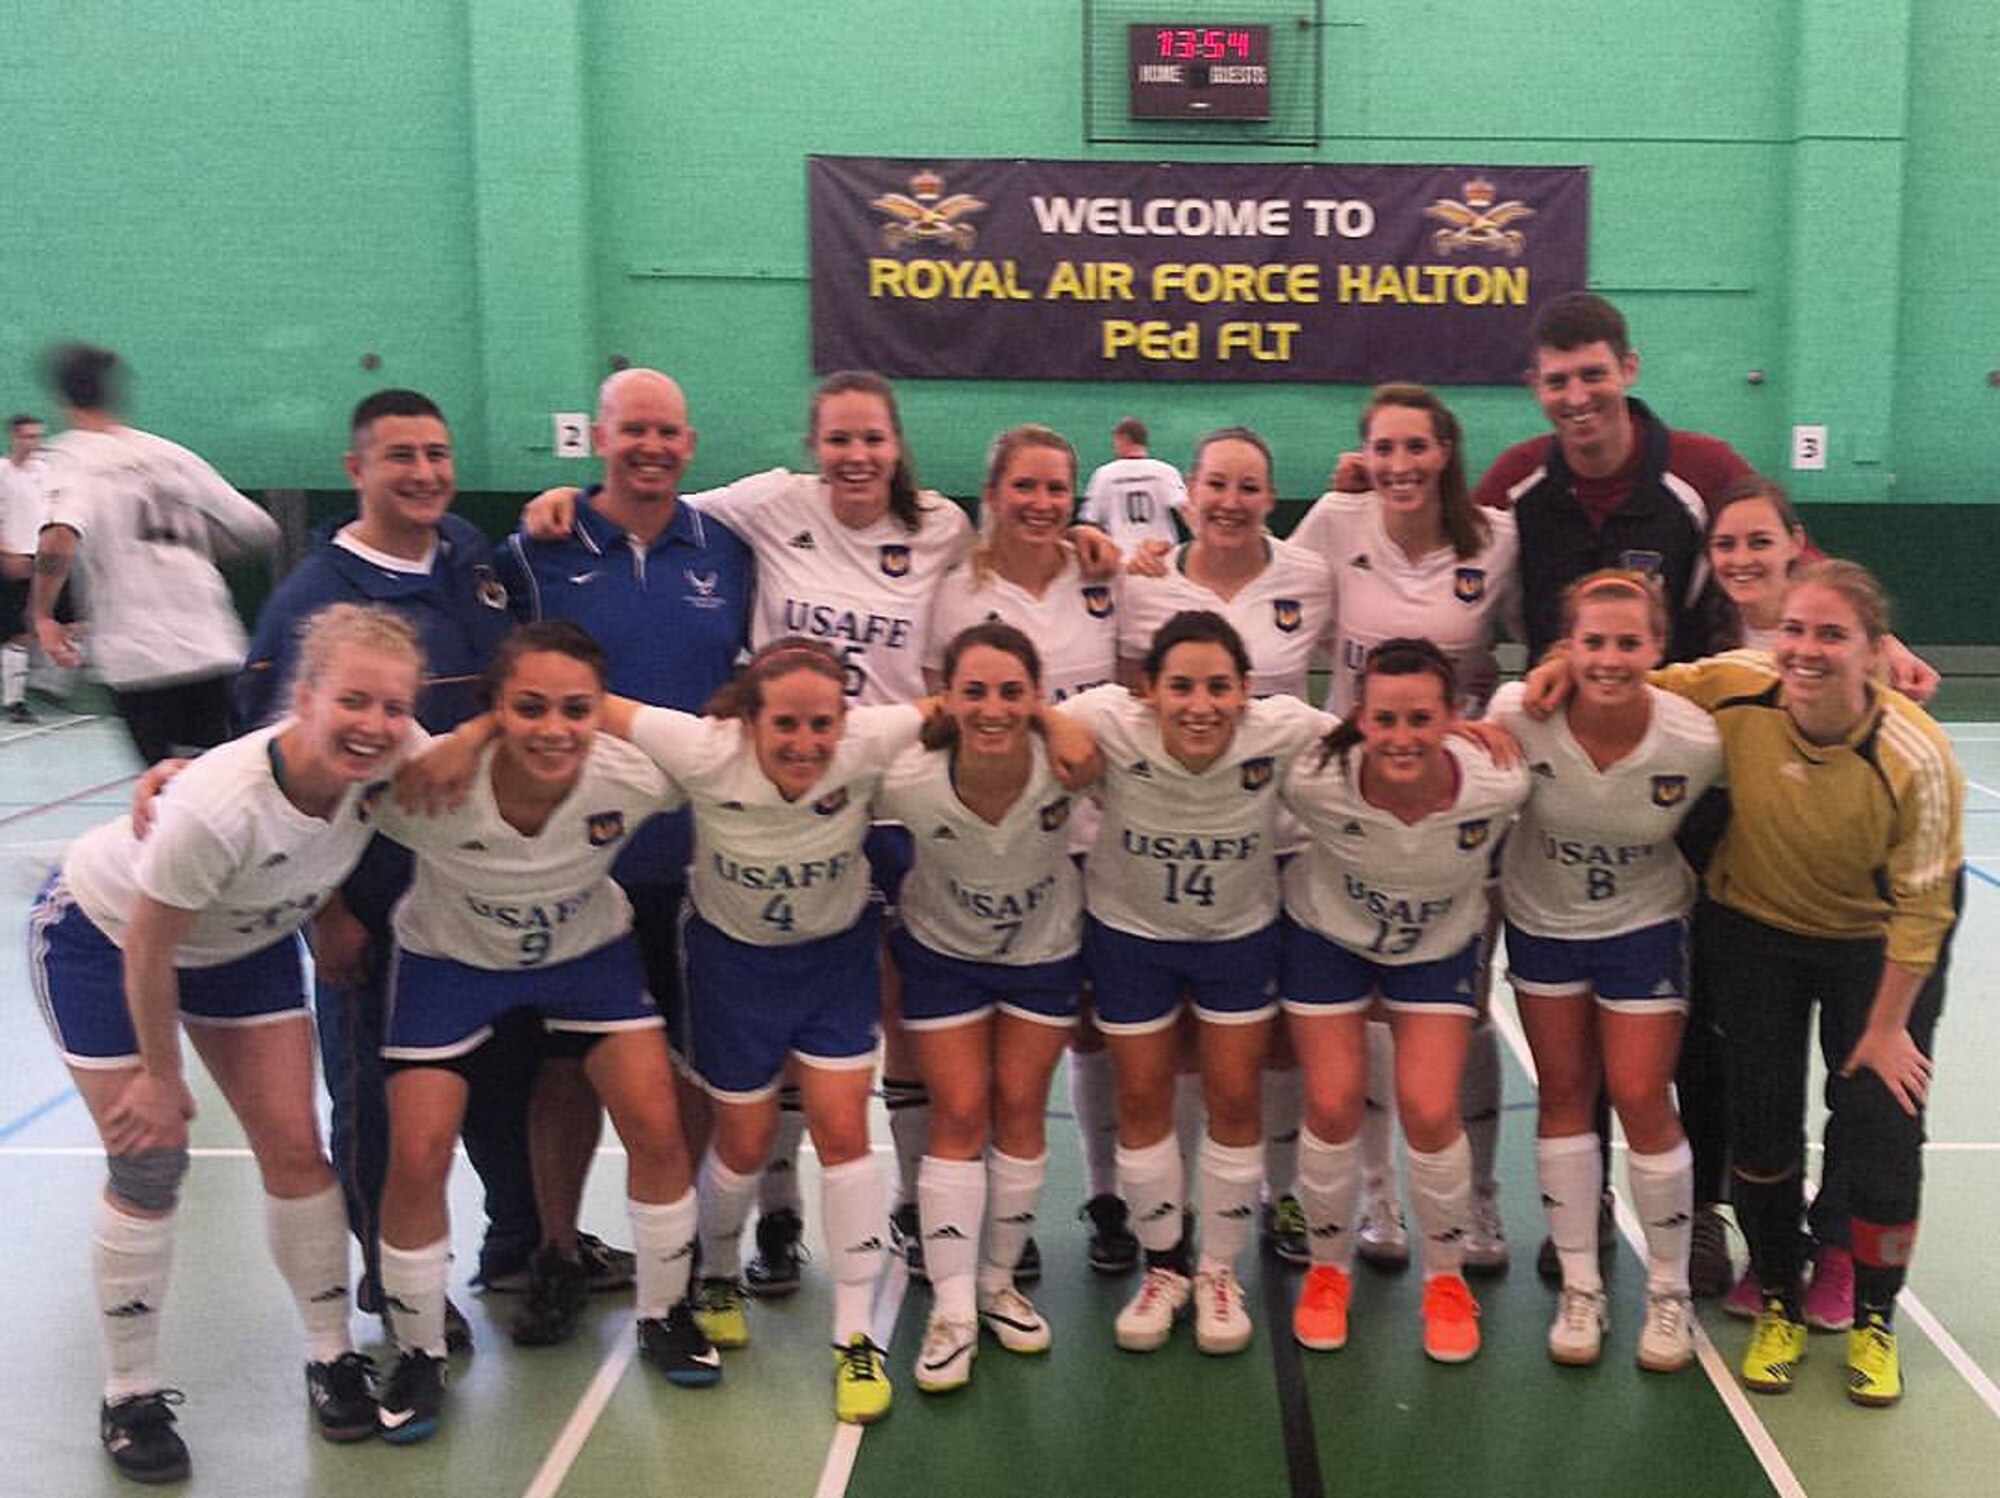 The U.S. Air Force Women’s Indoor Soccer Team poses for a photo after finishing third at the Headquarters Air Command Indoor Soccer Tournament Nov. 5, 2015, at Royal Air Force Halton, England. Senior Airman Tara Fadenrecht, front row, fourth from right, 22nd Air Refueling Wing Public Affairs photojournalist, was one of 12 members selected Air Force-wide to play for the team. (Courtesy photo)